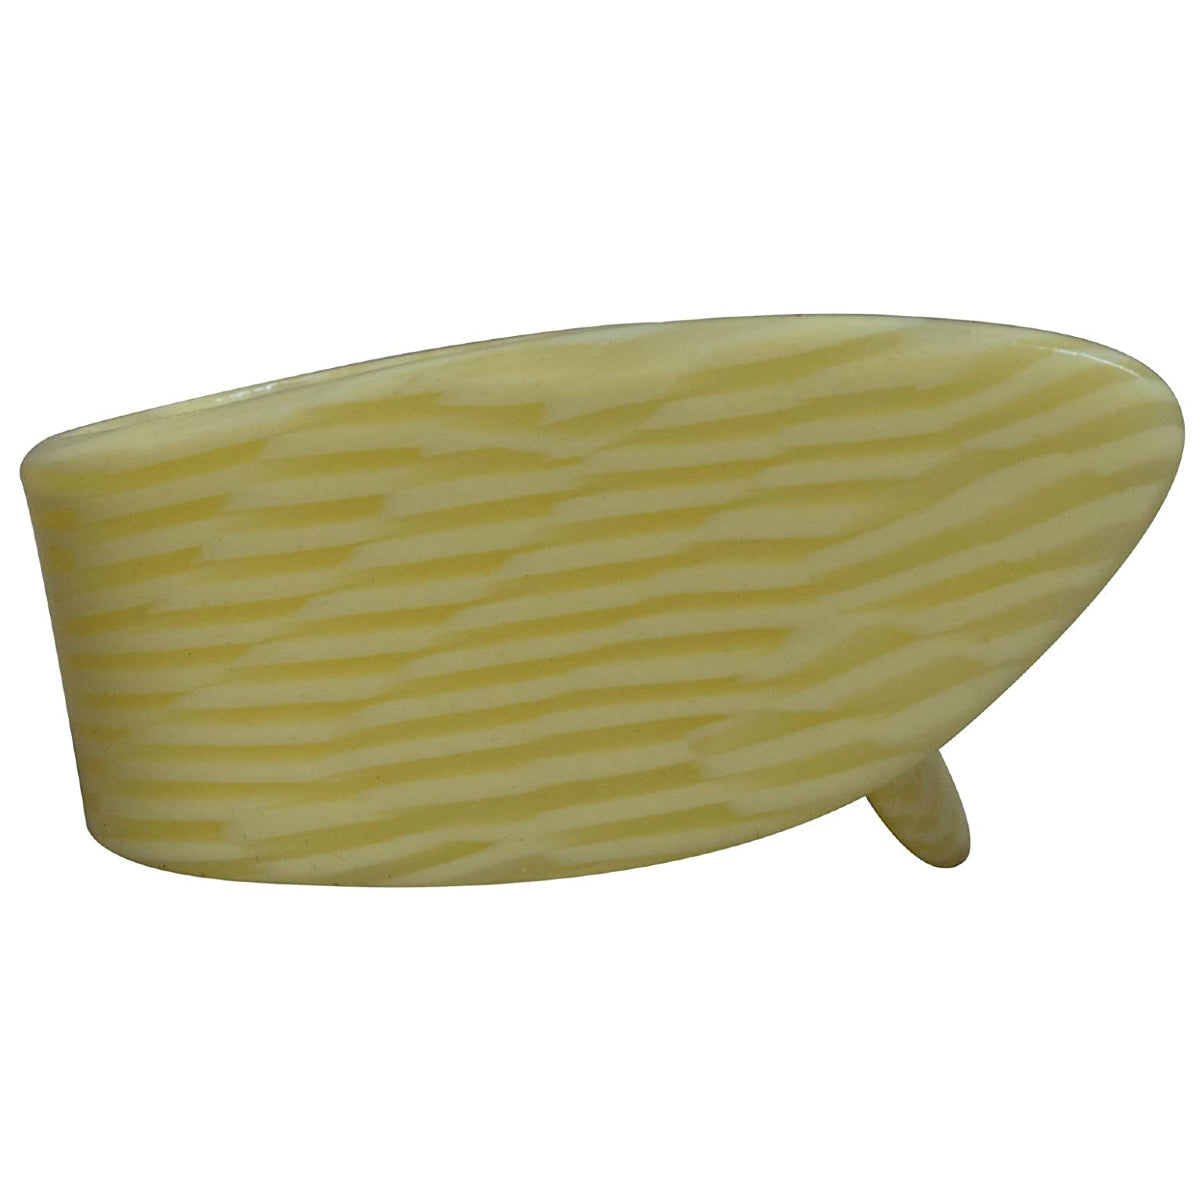 Golden Gate GP-10 Large Grained Ivoroid Thumb Pick - EACH